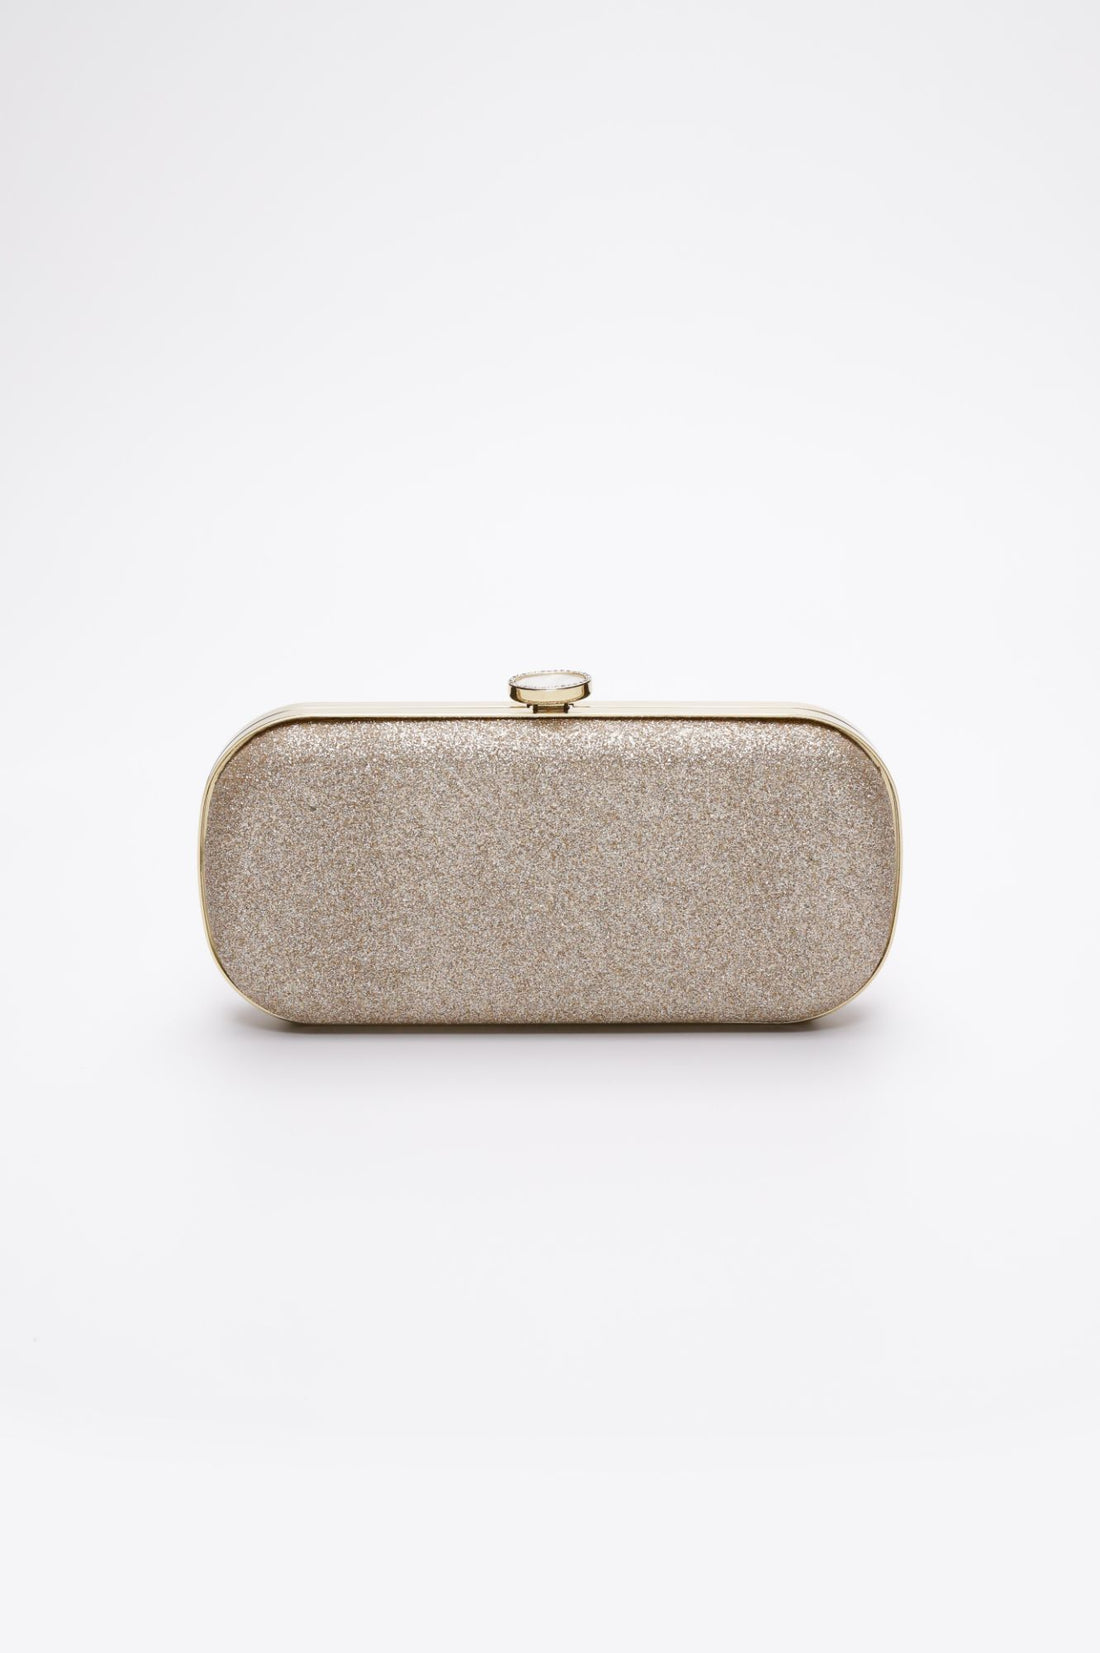 Bella clutch with gold hardware in Champagne Shimmer.